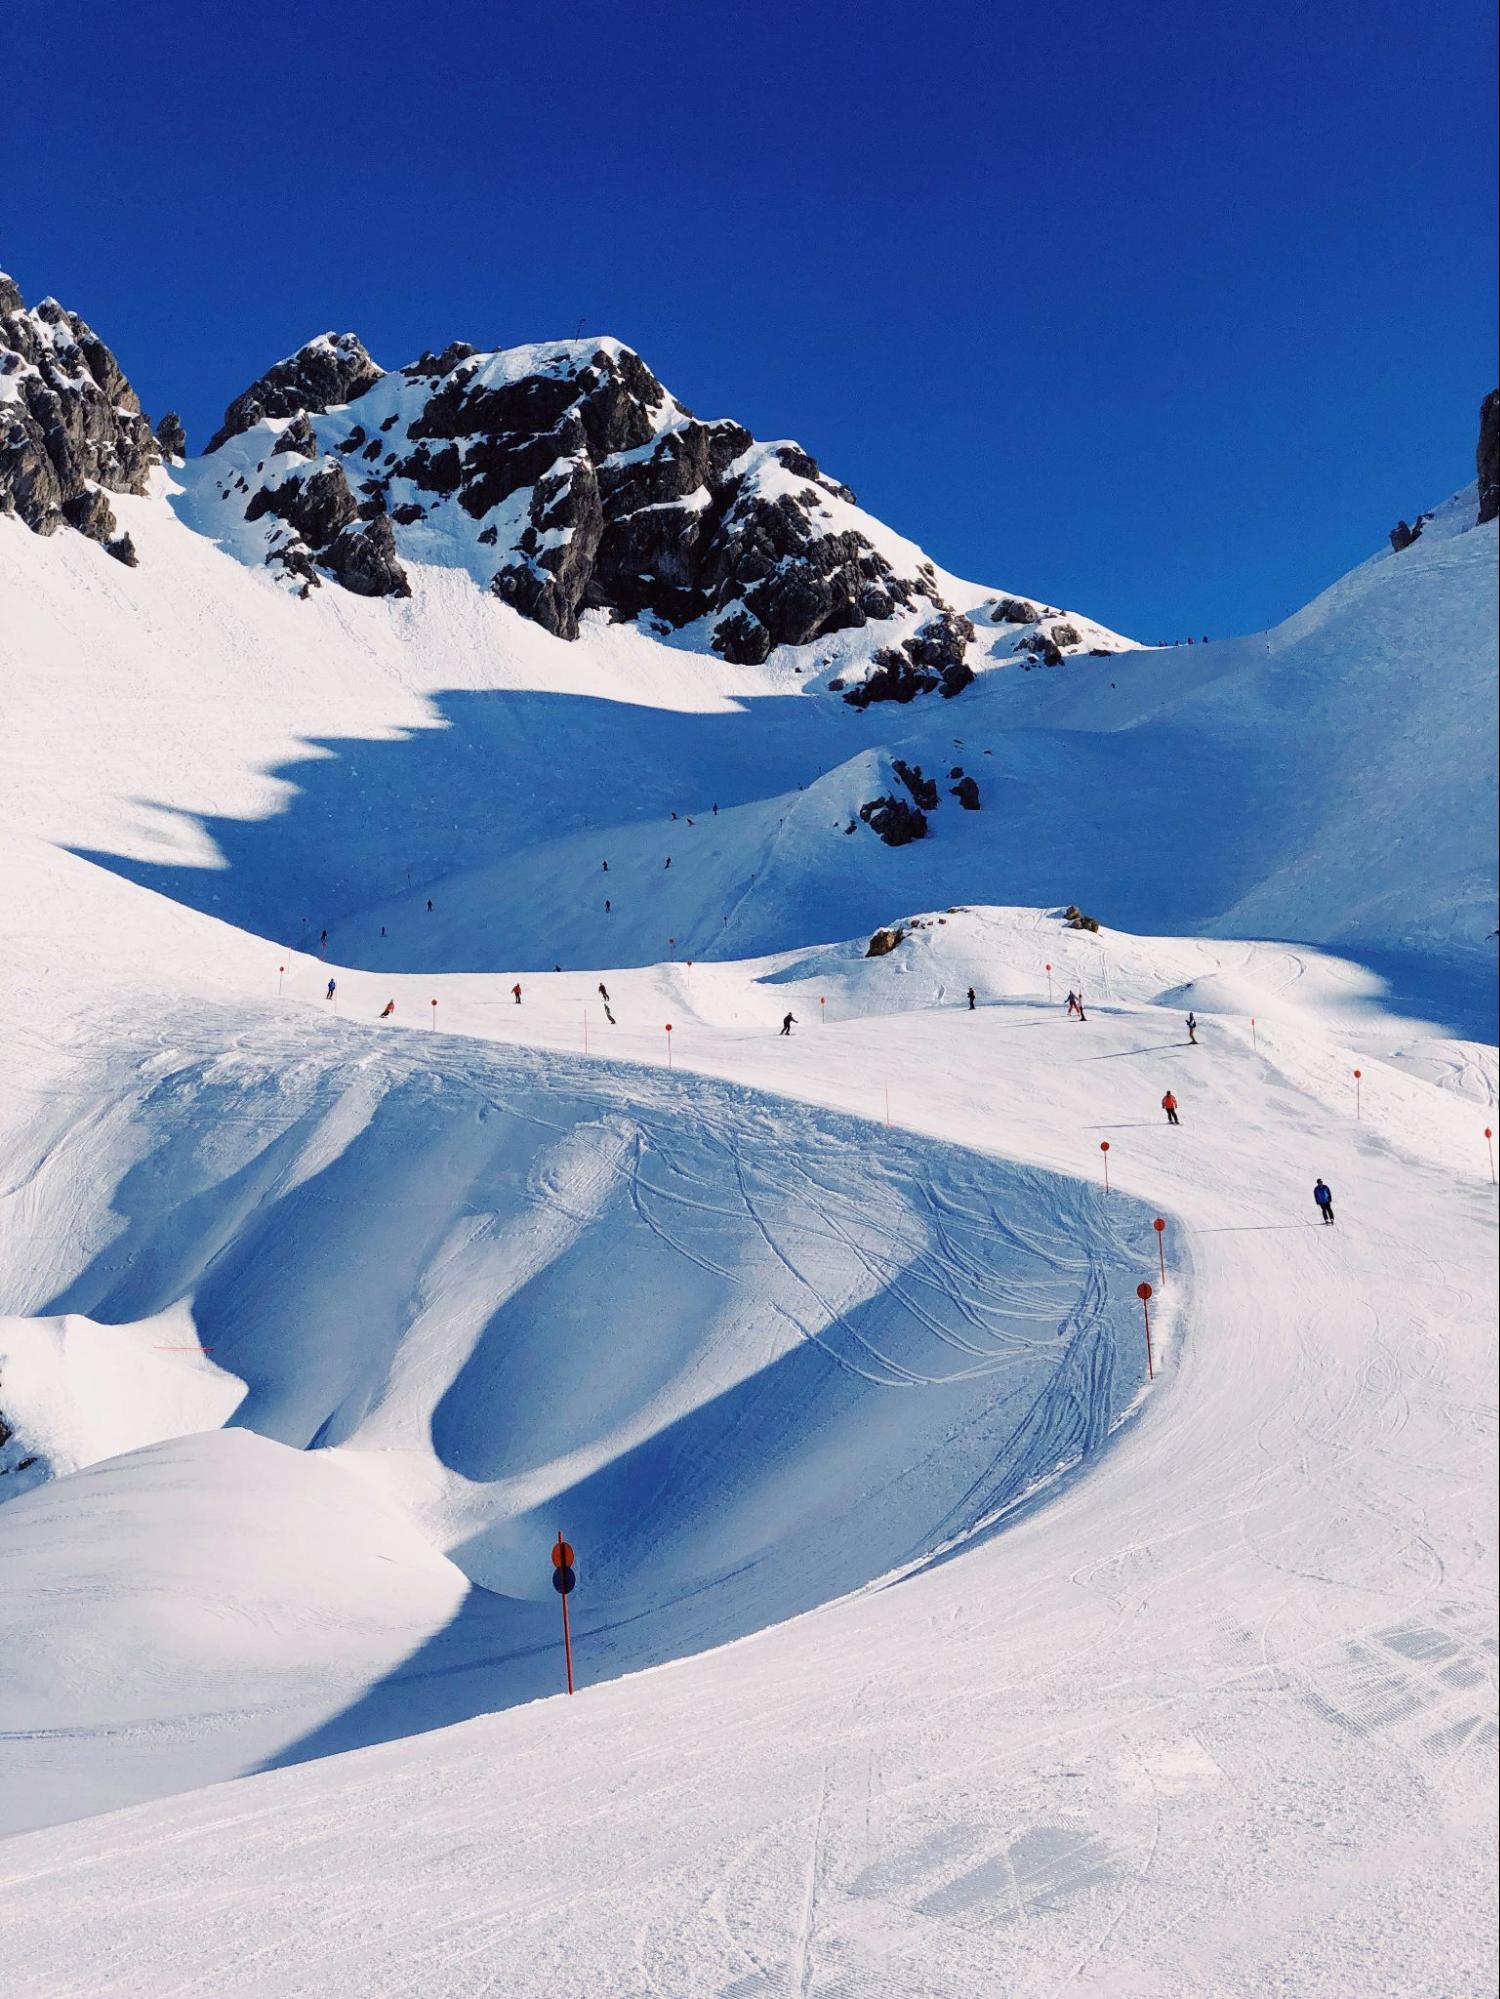 Several skiers on a mountain slope in Austria.